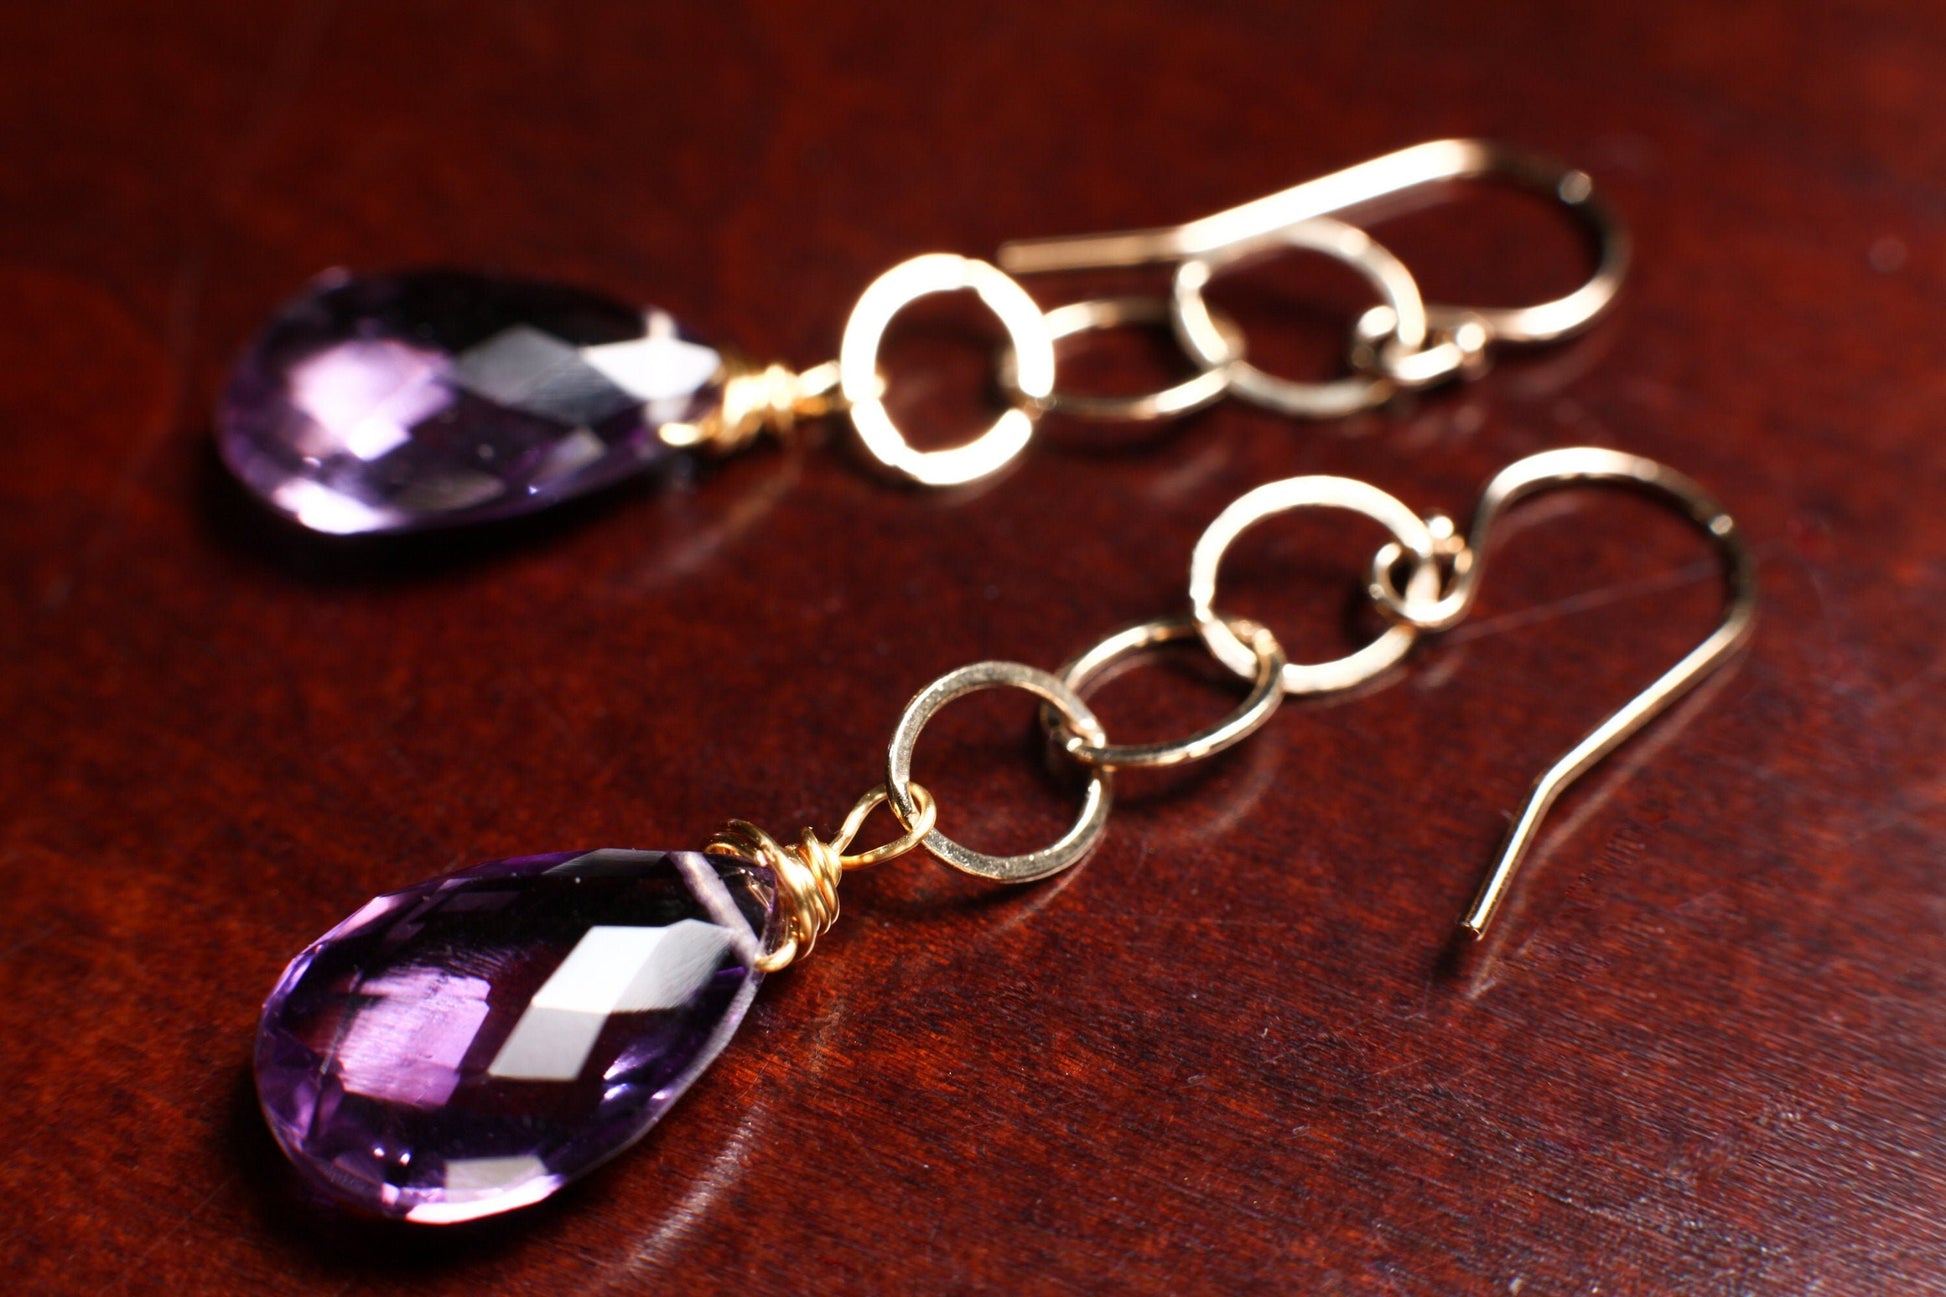 AAA Amethyst Cut Briolette Pear Drop 10x16mm in 14K Gold Filled Chain & Ear Wire,Soothing Gem, Natural AAA cut stone Amethyst drop